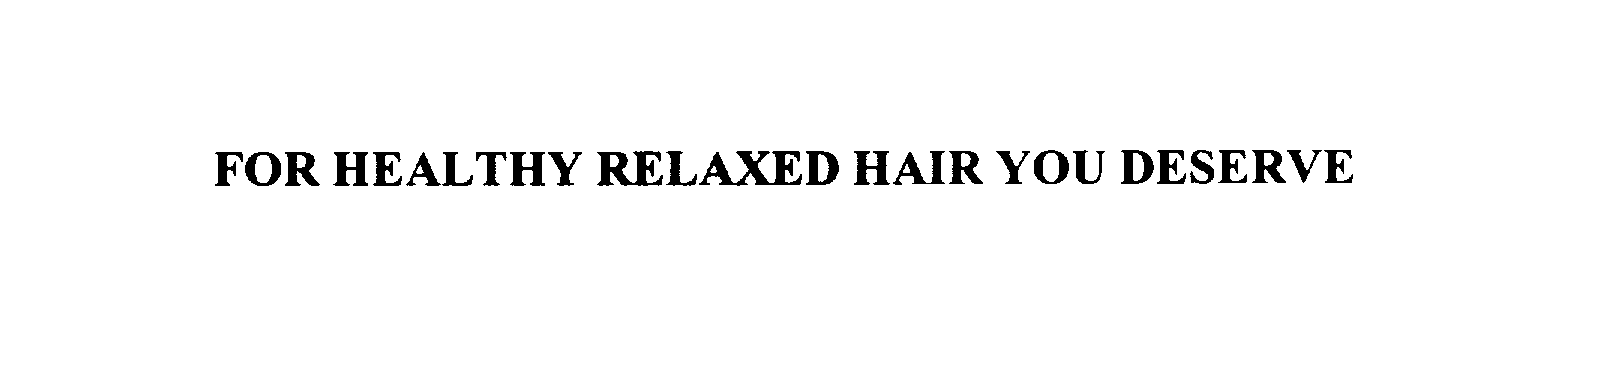  FOR HEALTHY RELAXED HAIR YOU DESERVE